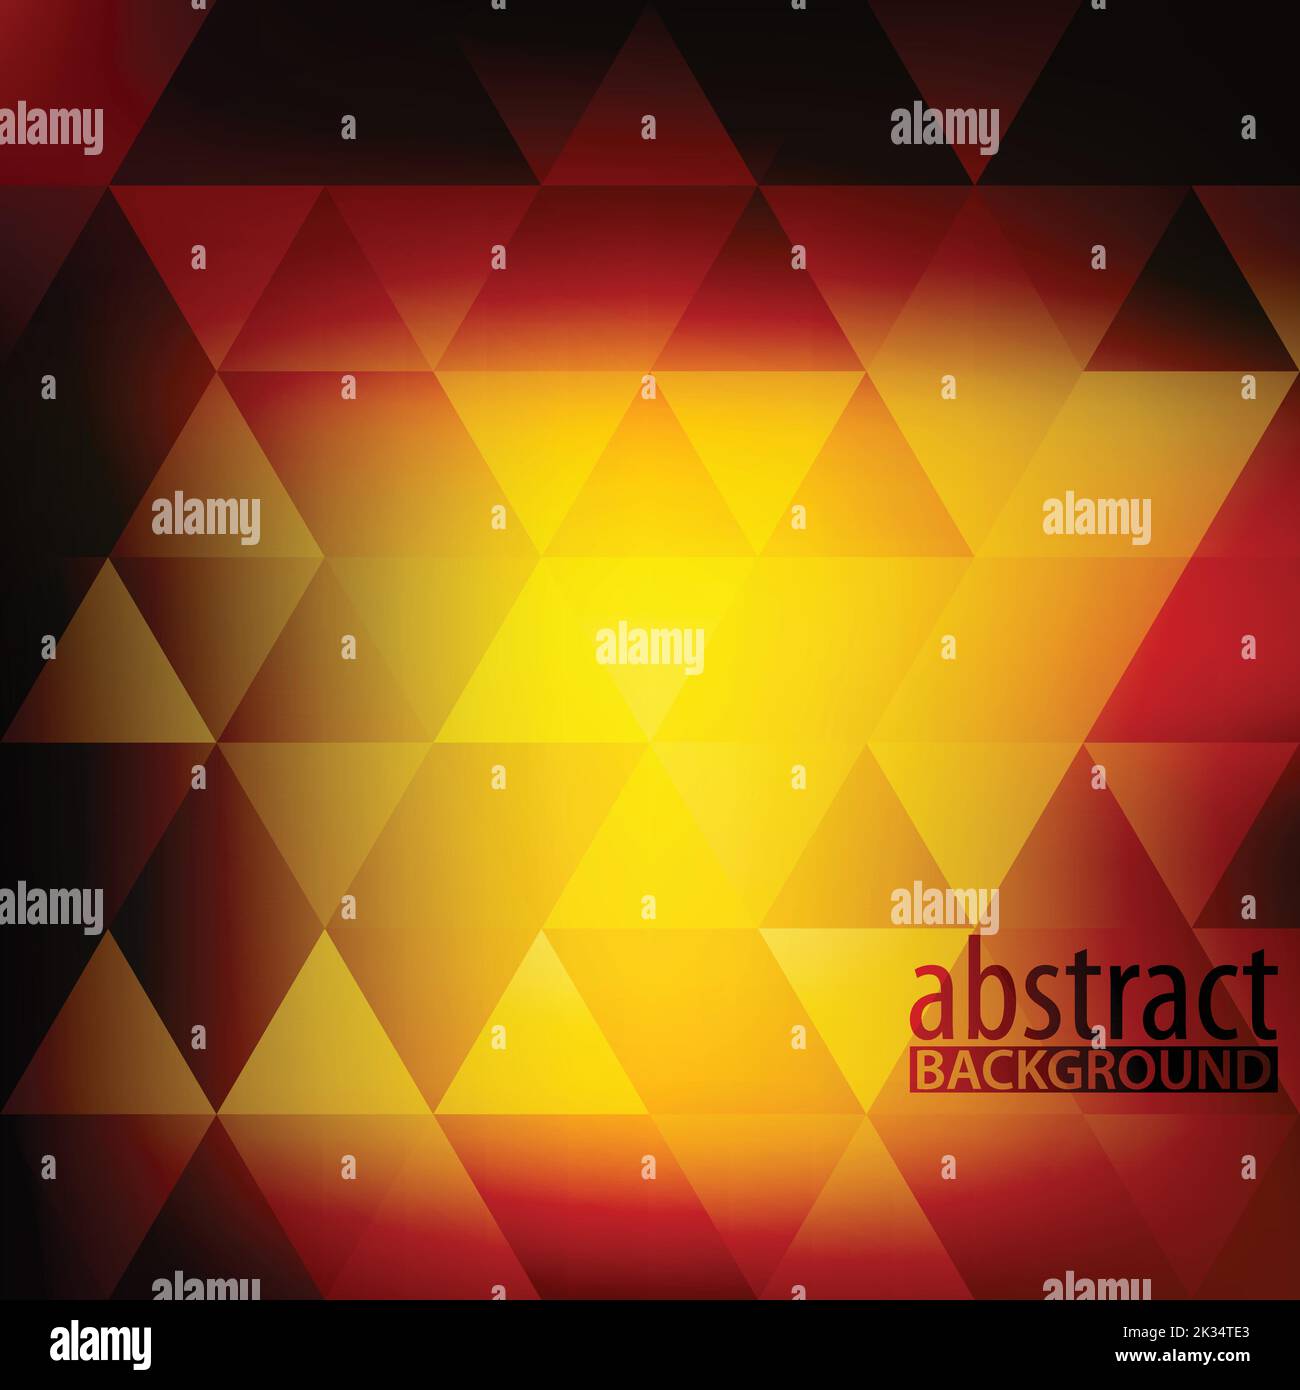 Abstarct dark red and yellow pattern with triangles. Vector Stock Vector